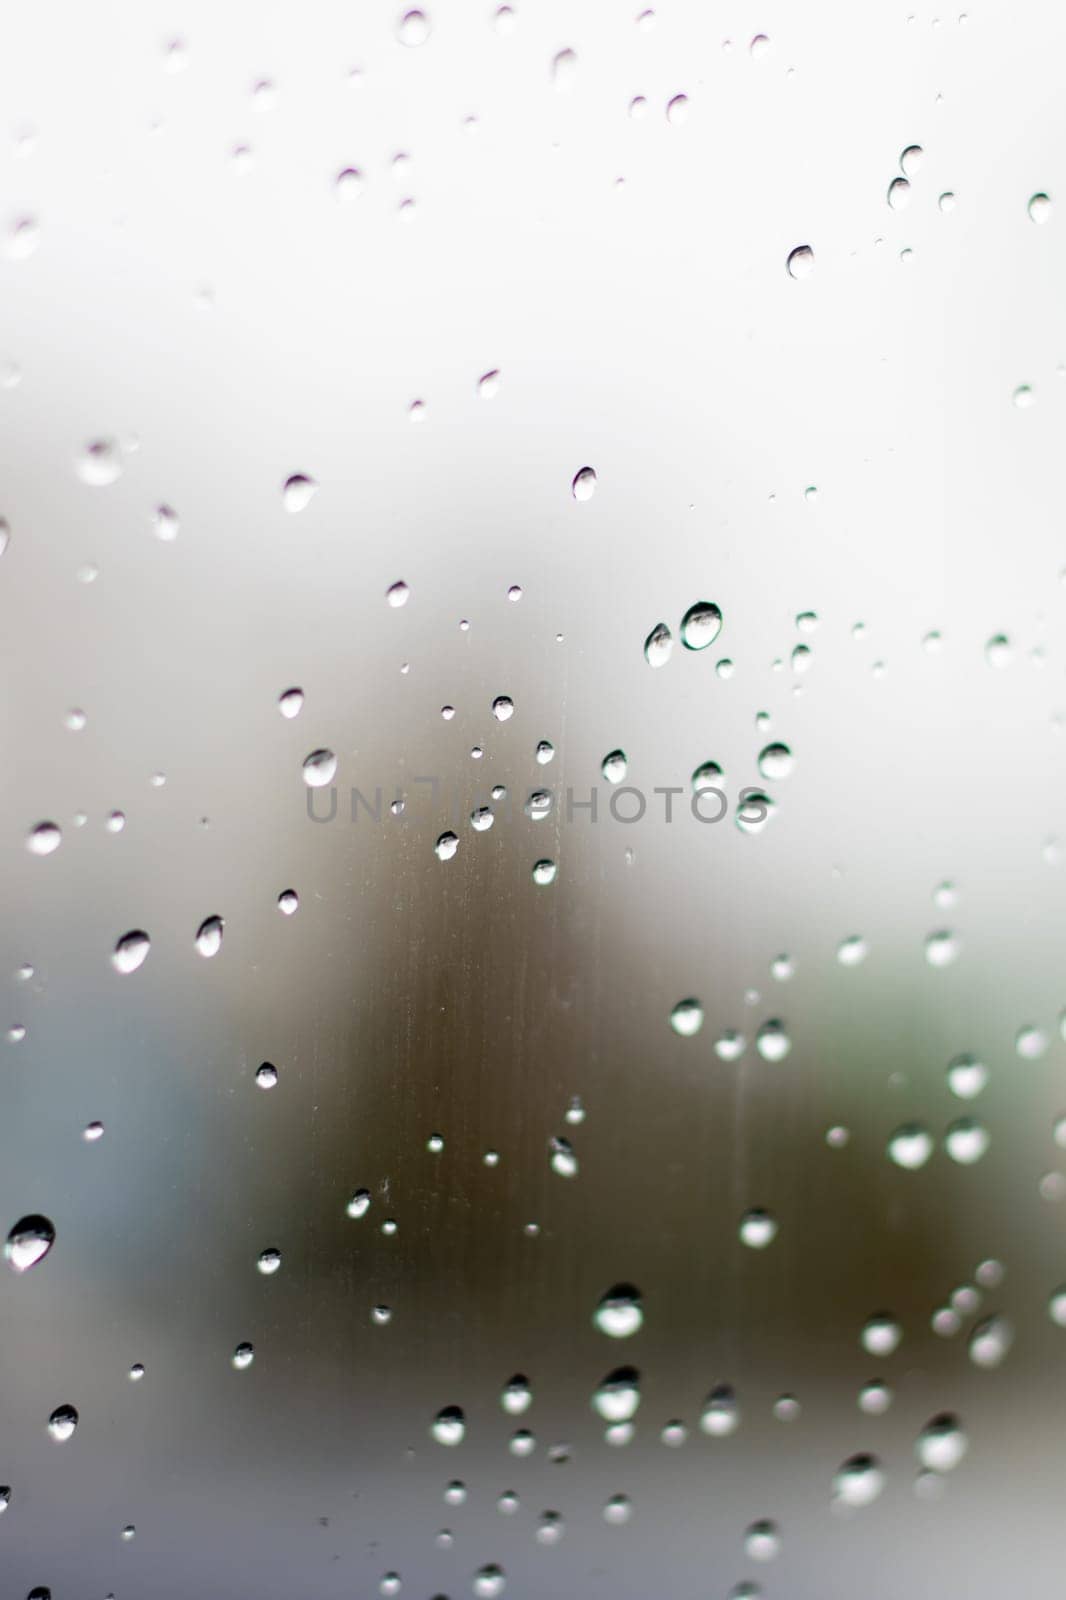 Electric blue rain drops on glass with blurry sky background by Vera1703